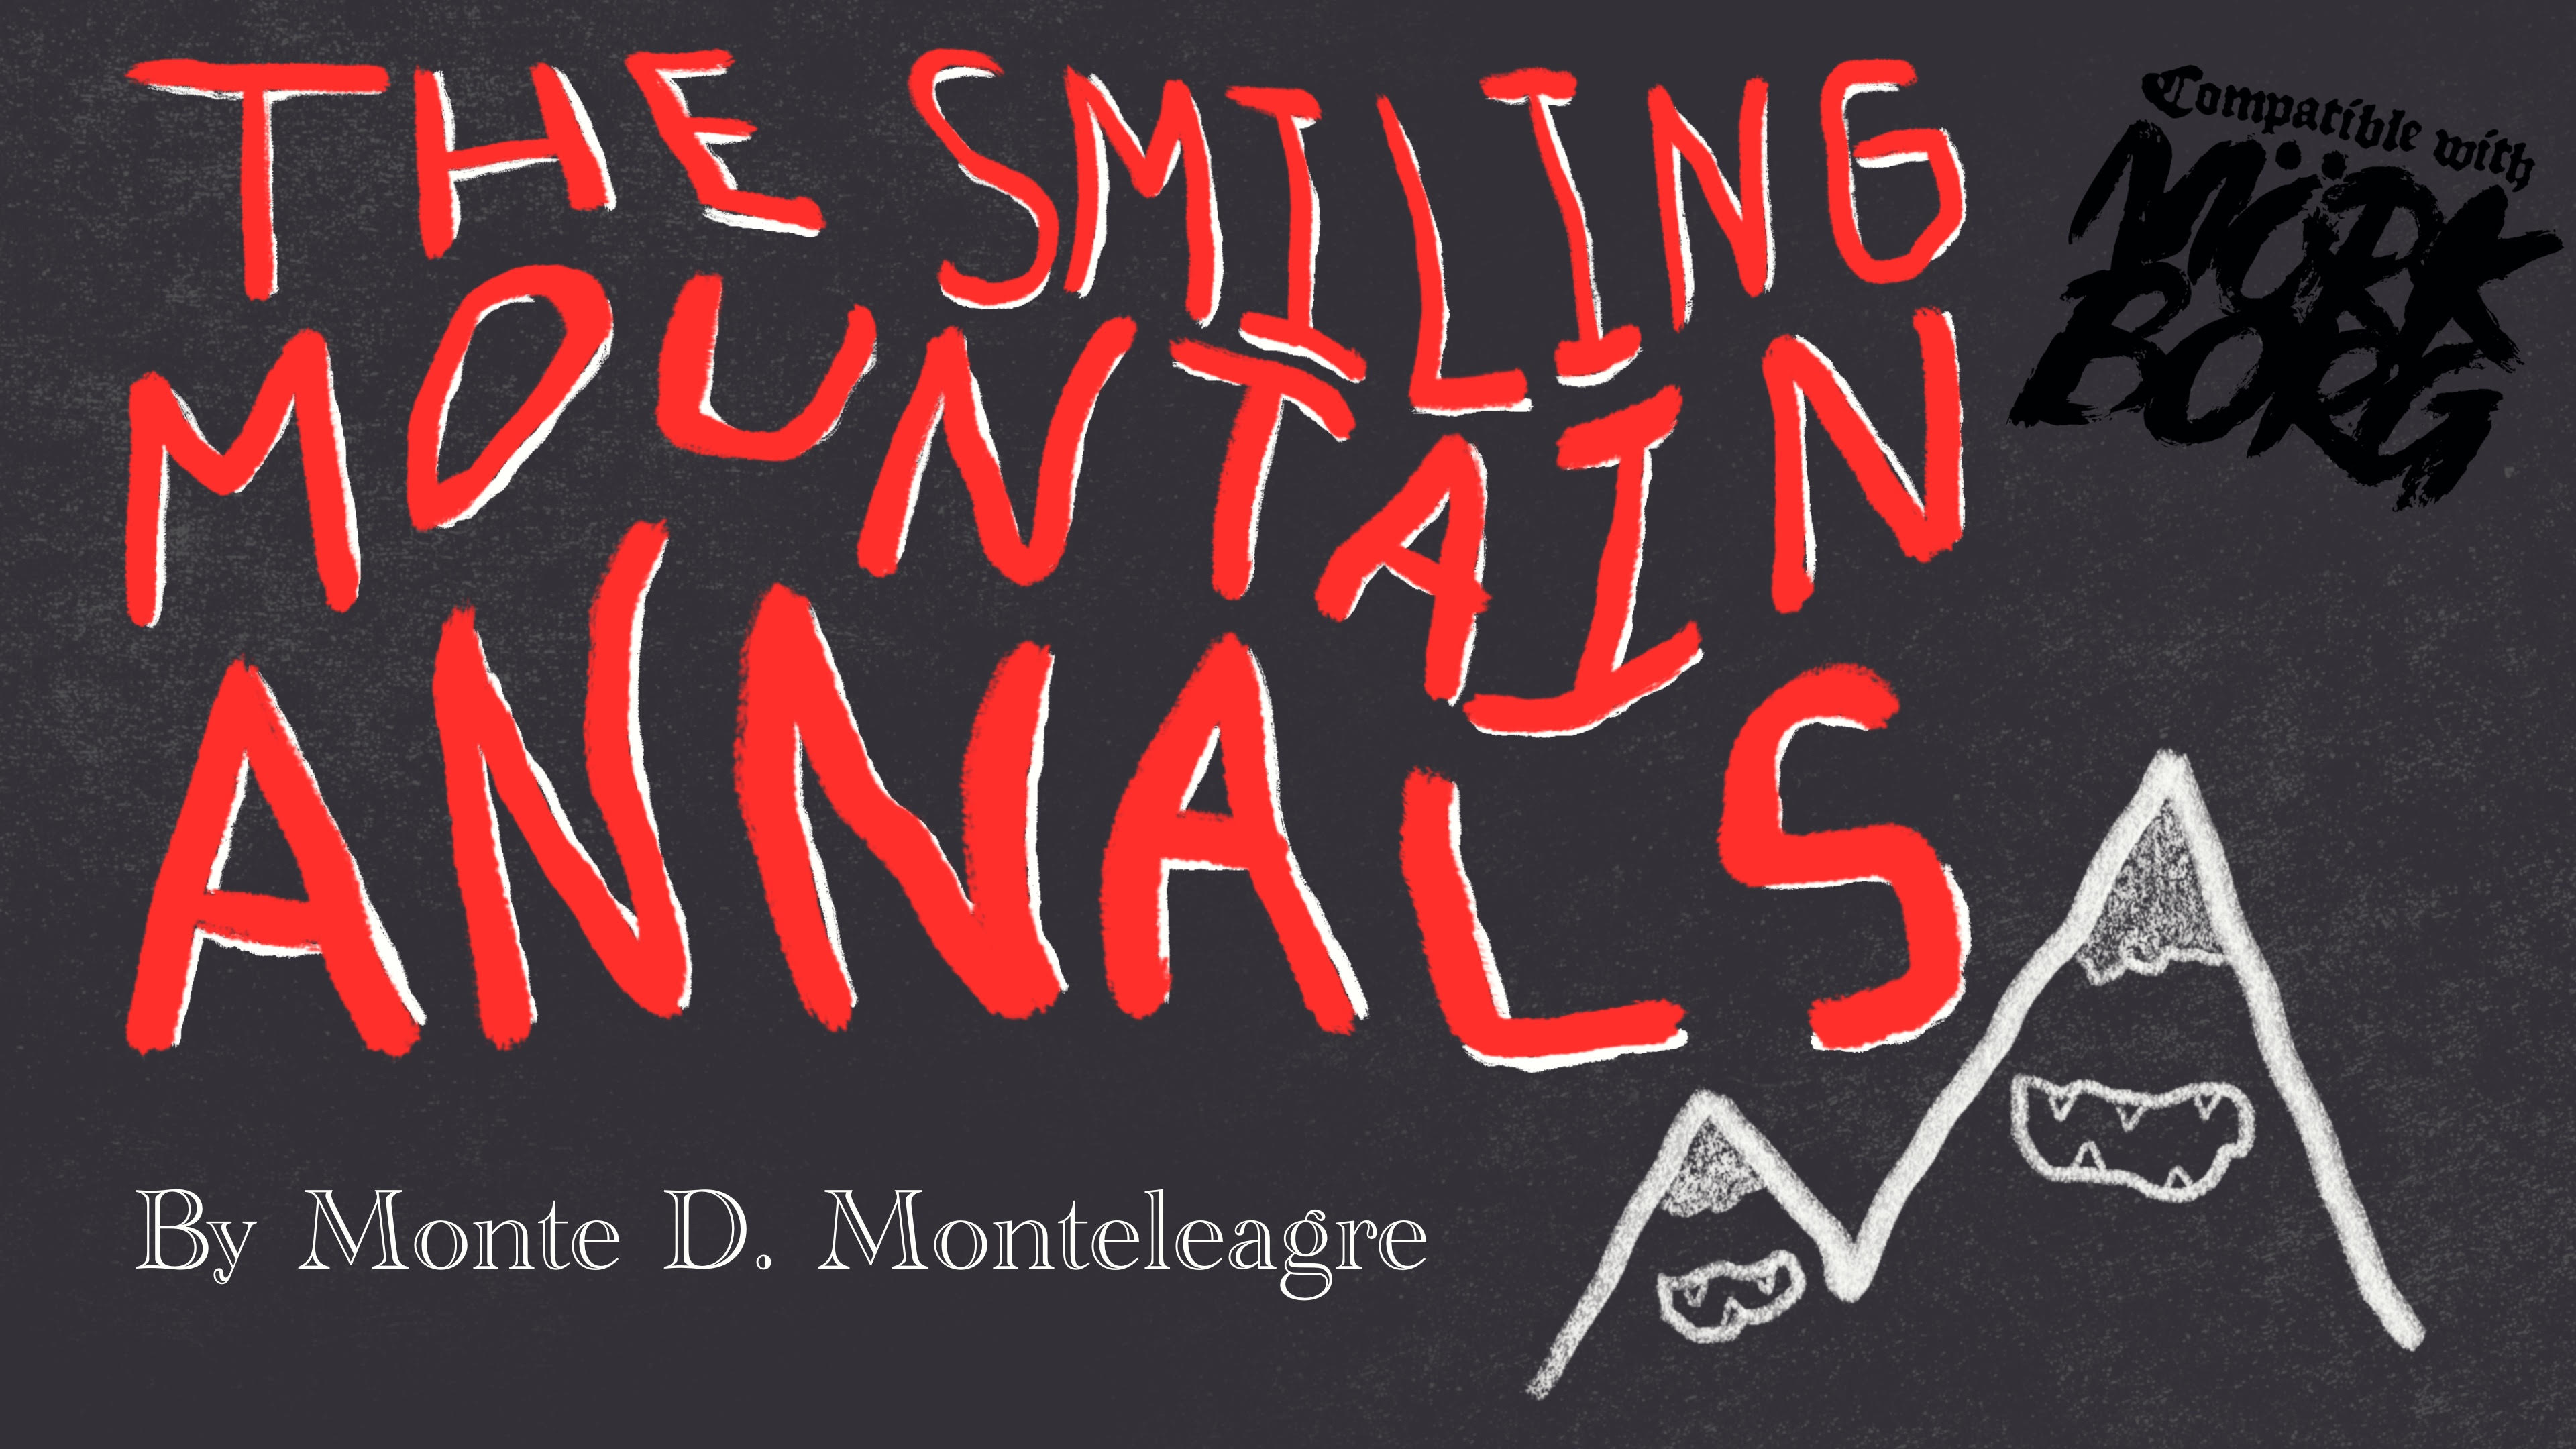 The Smiling Mountain Annals